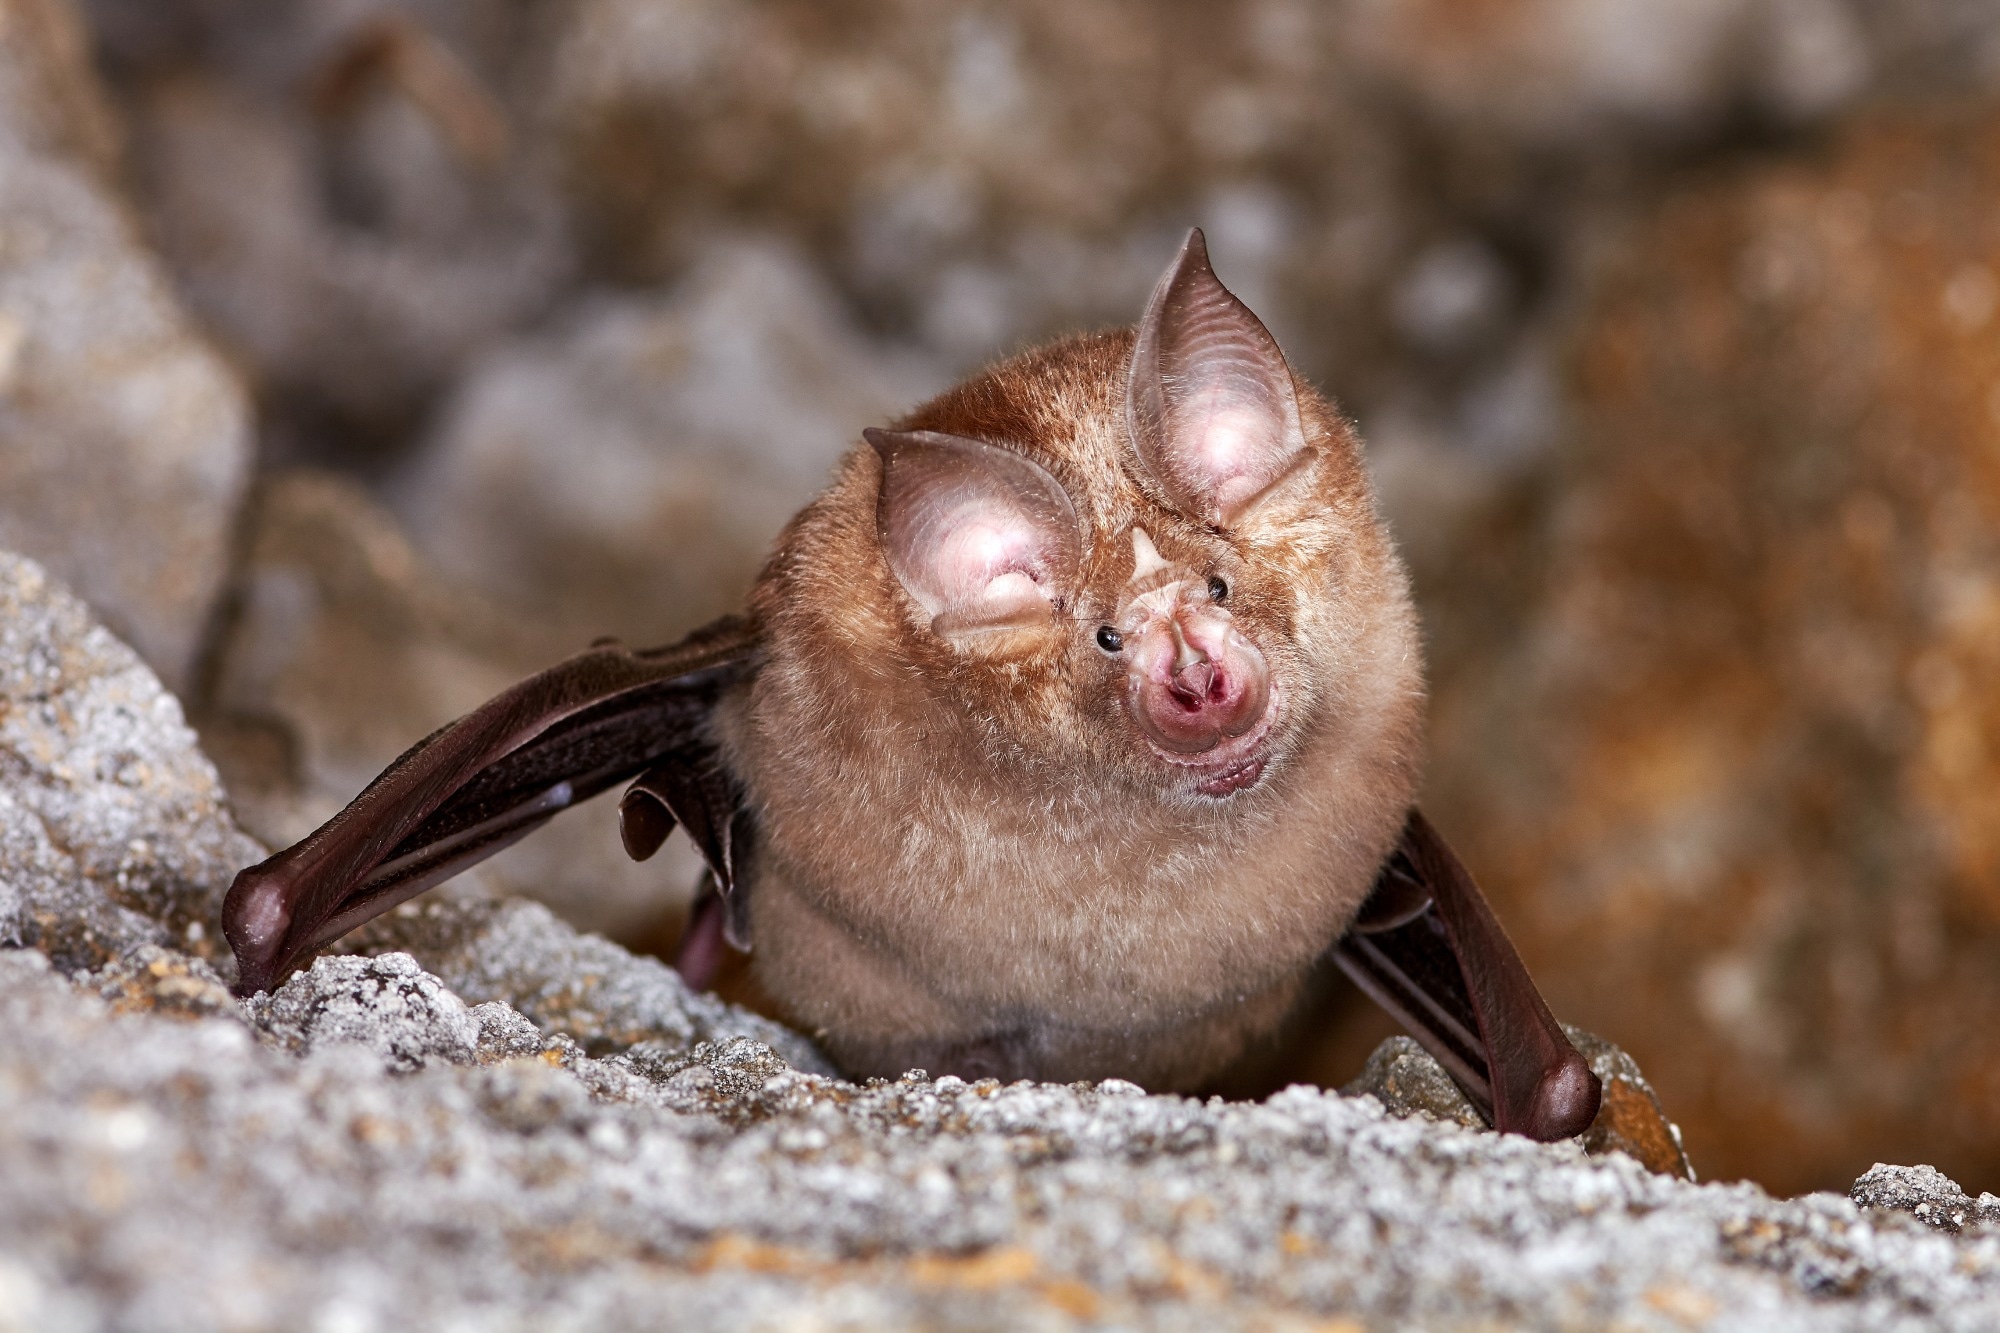 Study: Genomic screening of 16 UK native bat species through conservationist networks uncovers coronaviruses with zoonotic potential. Image Credit: aaltair/Shutterstock.com